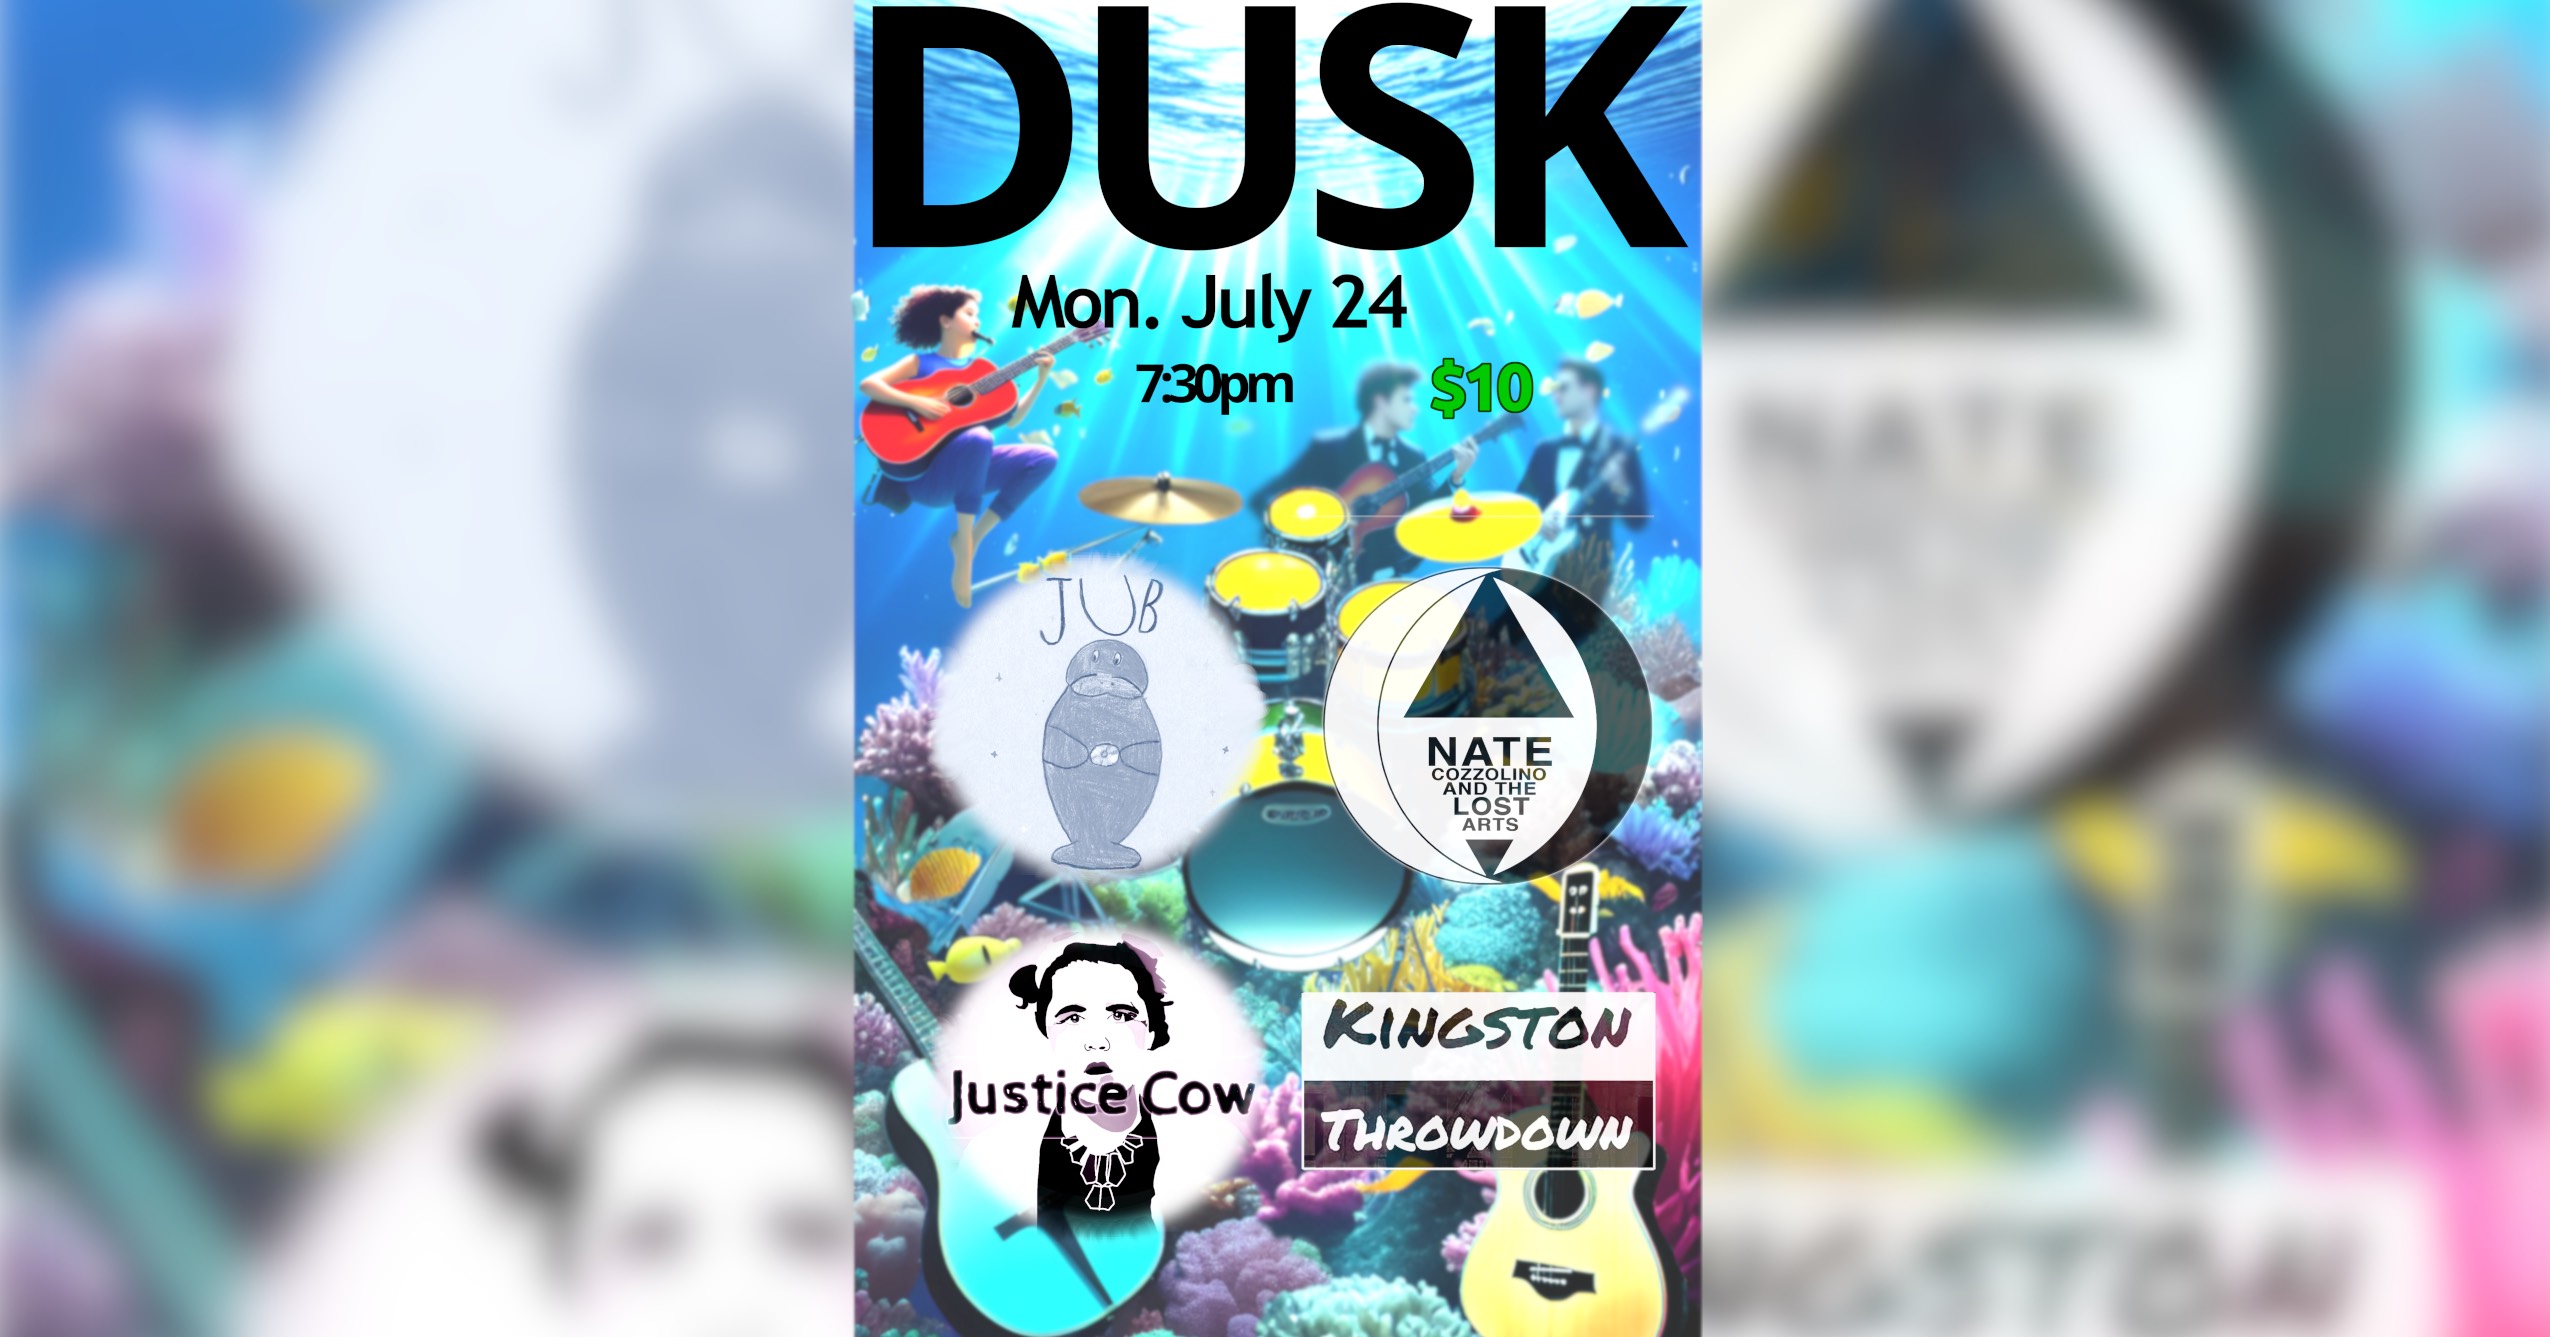 Dusk in Providence, Monday, July 24 at 7:30 pm, Jub, Nate Cozzolino and the Lost Arts, Justice Cow, and Kingston Throwdown